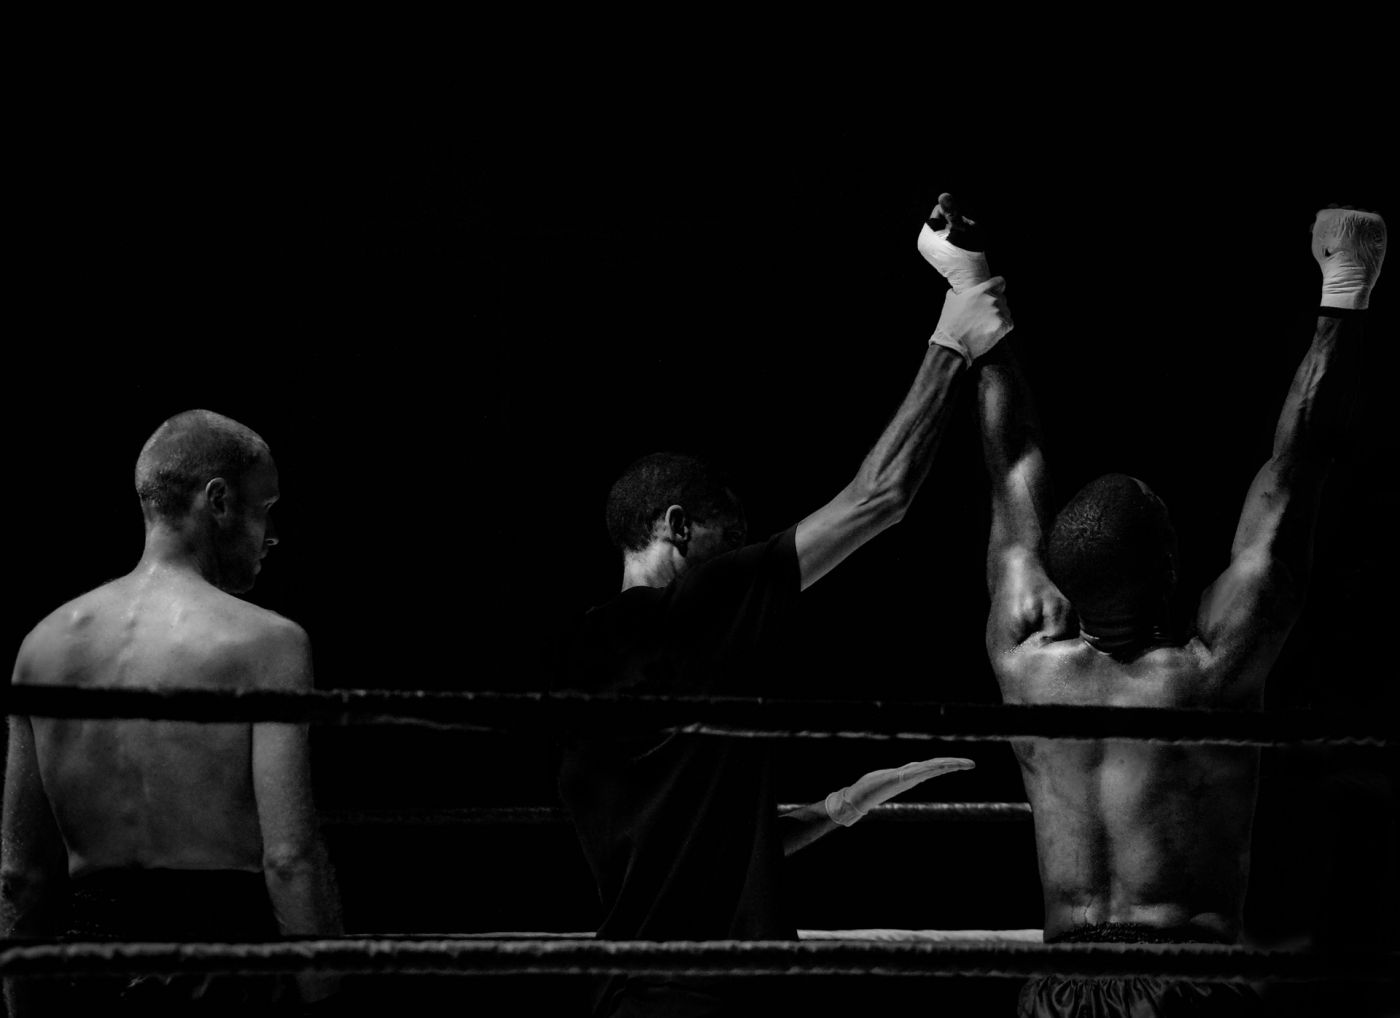 Boxer having arms held aloft after victory in the rink - black and white